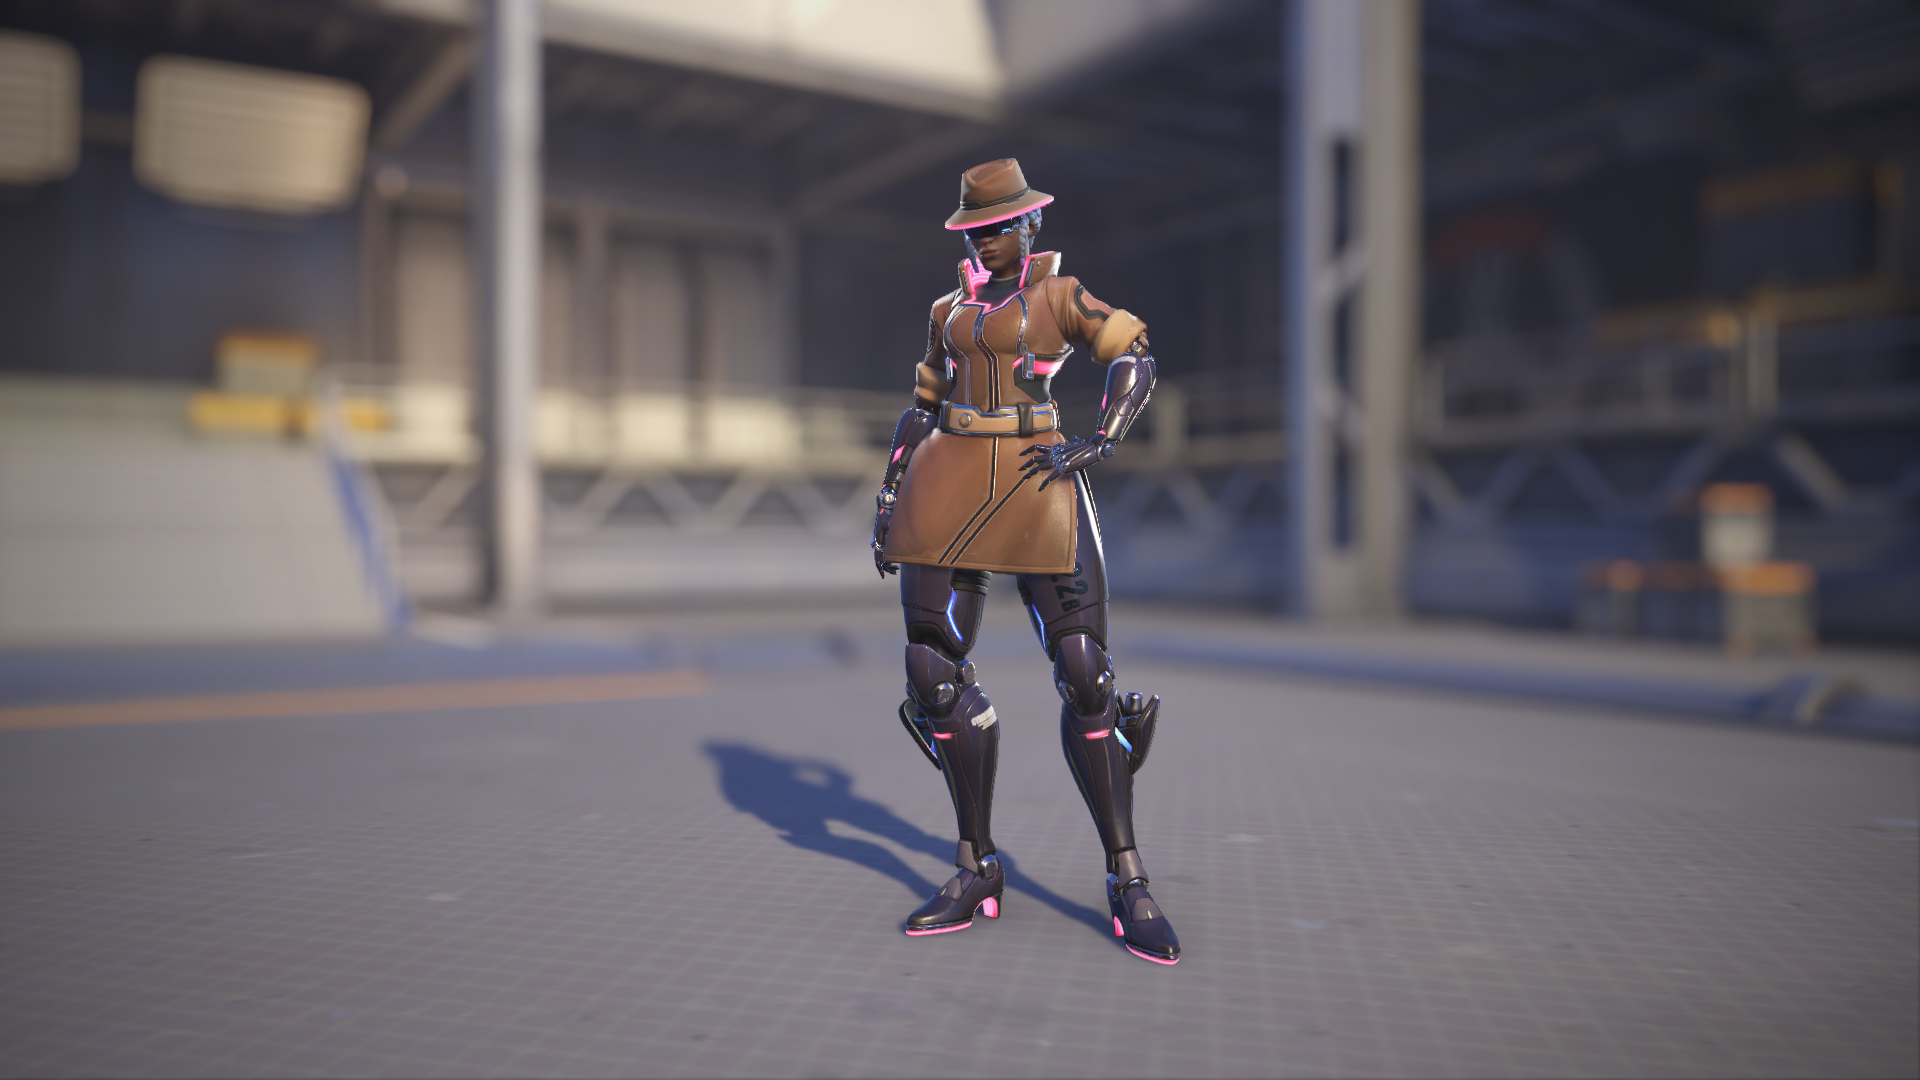 Sojourn models her Cyber Detective skin in Overwatch 2.